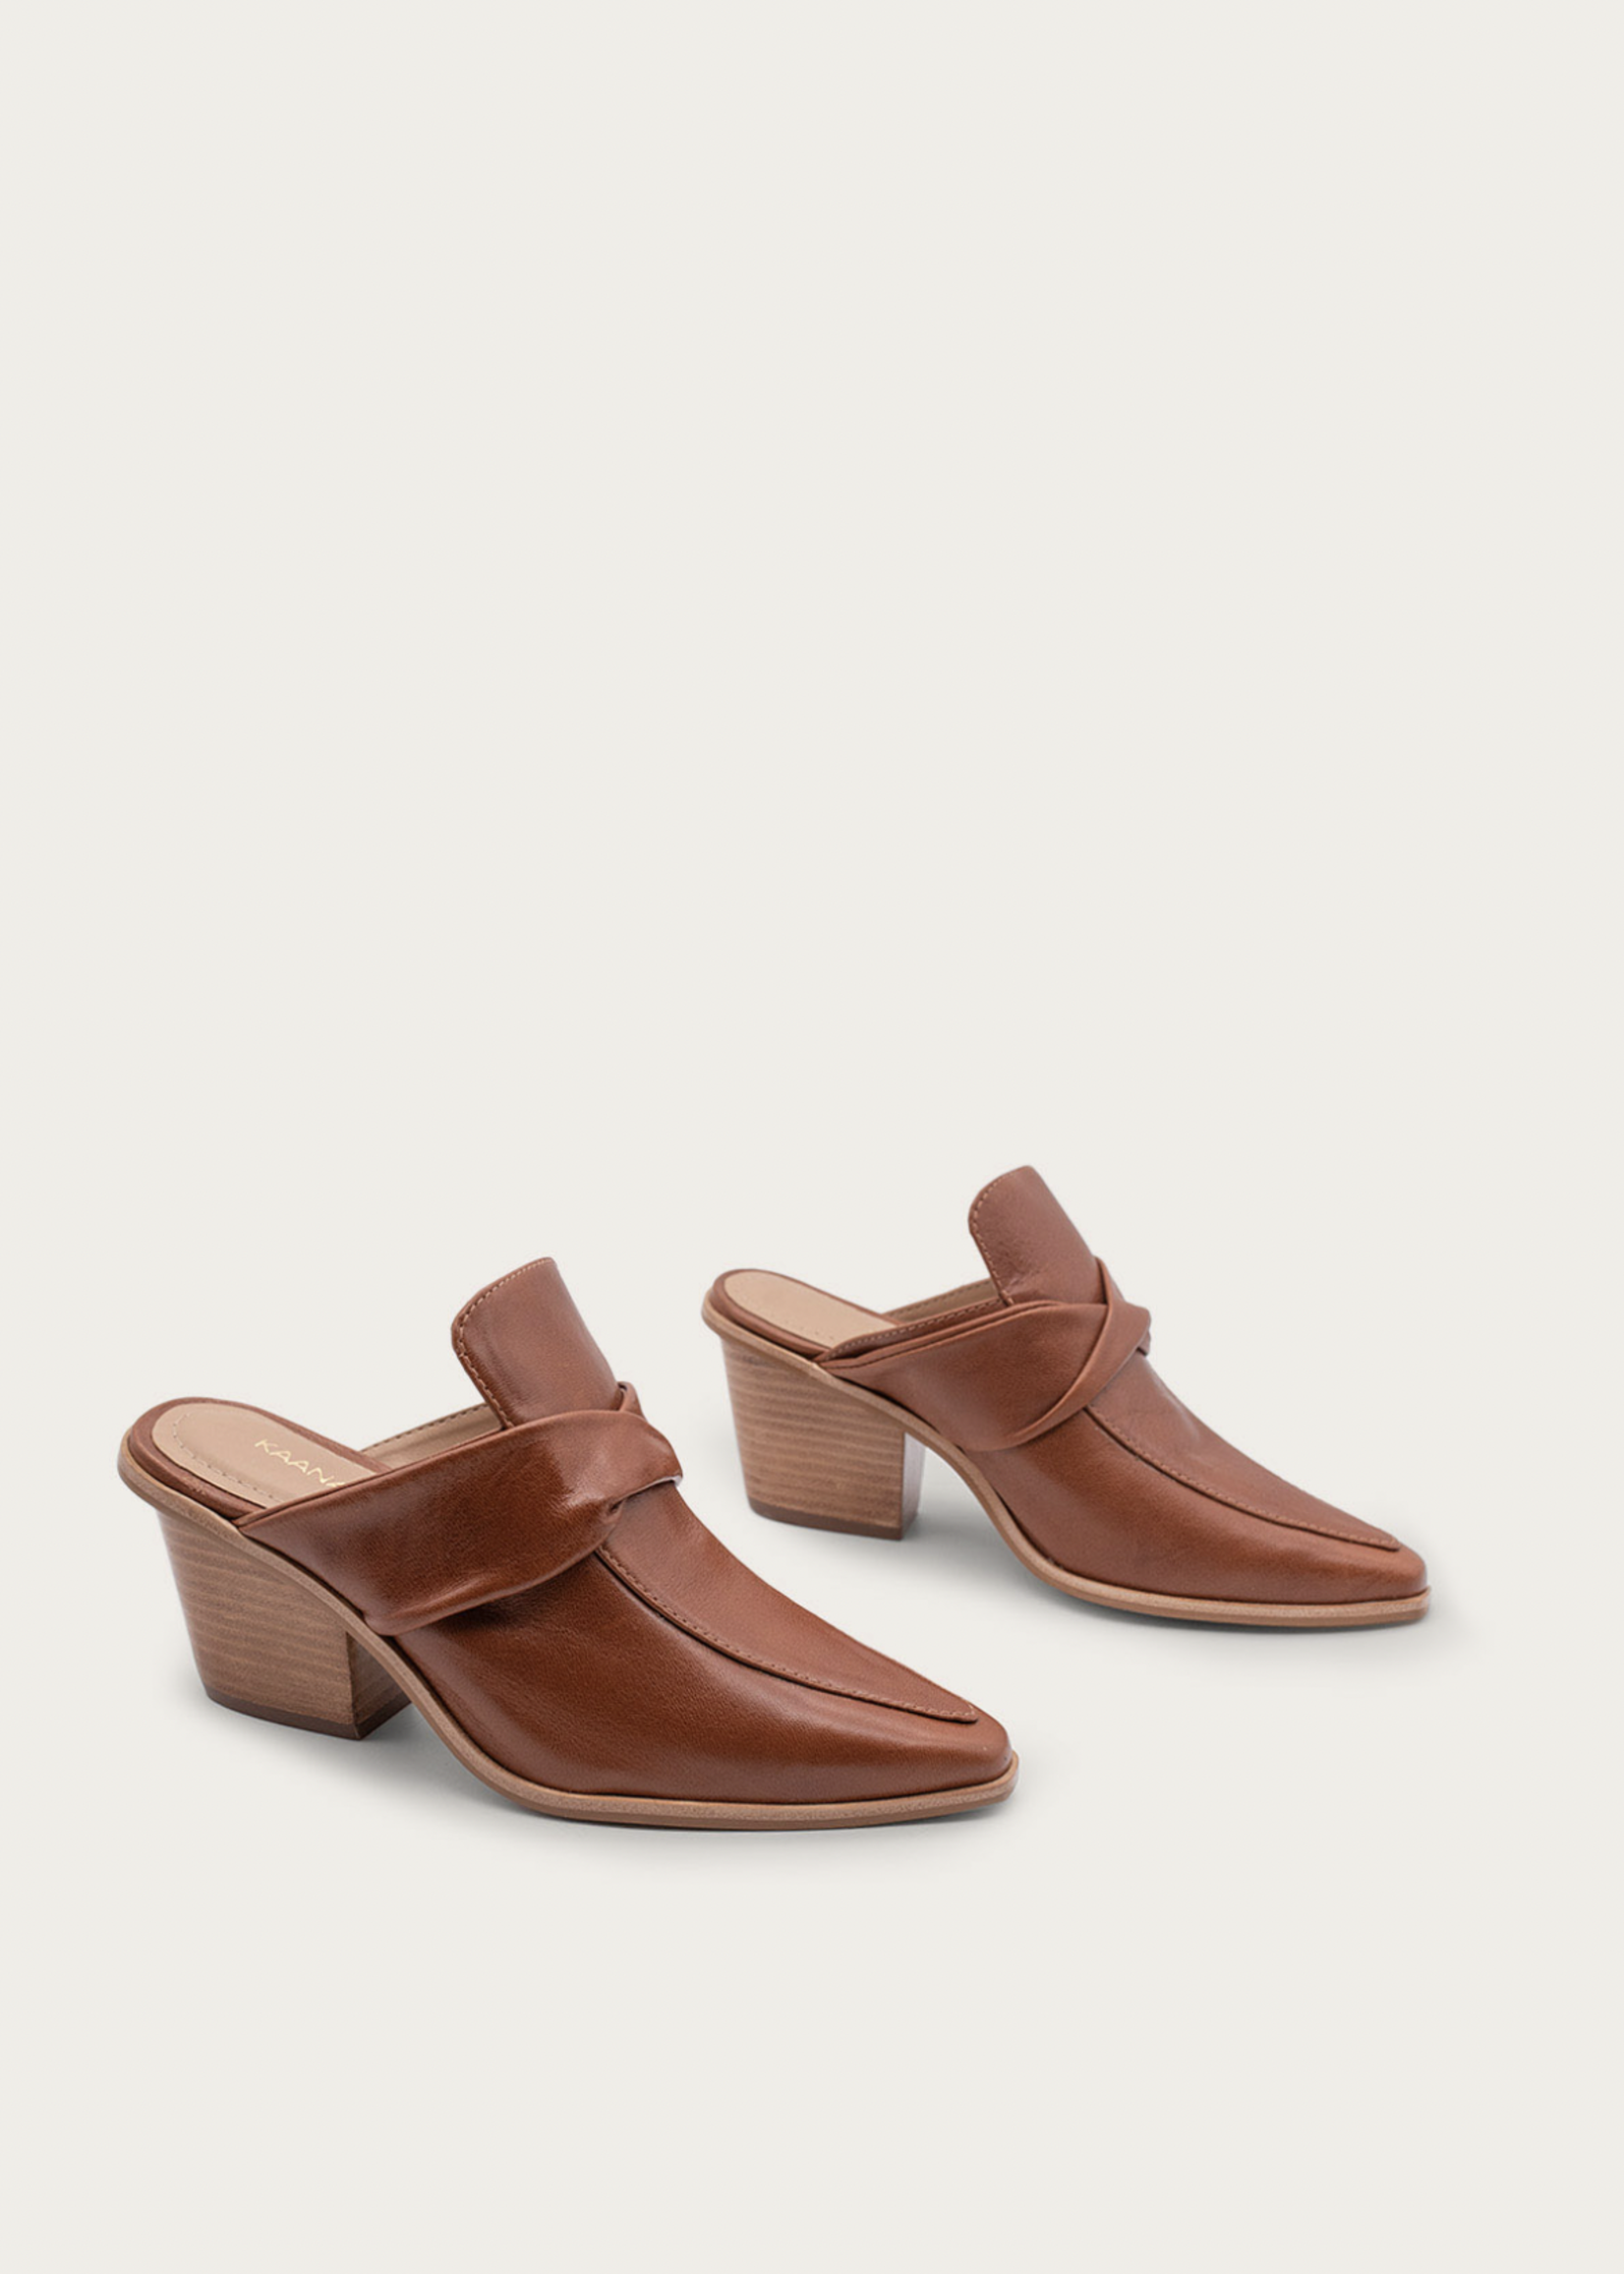 Elitaire Boutique Meridiana Loafer Mule in Toffee